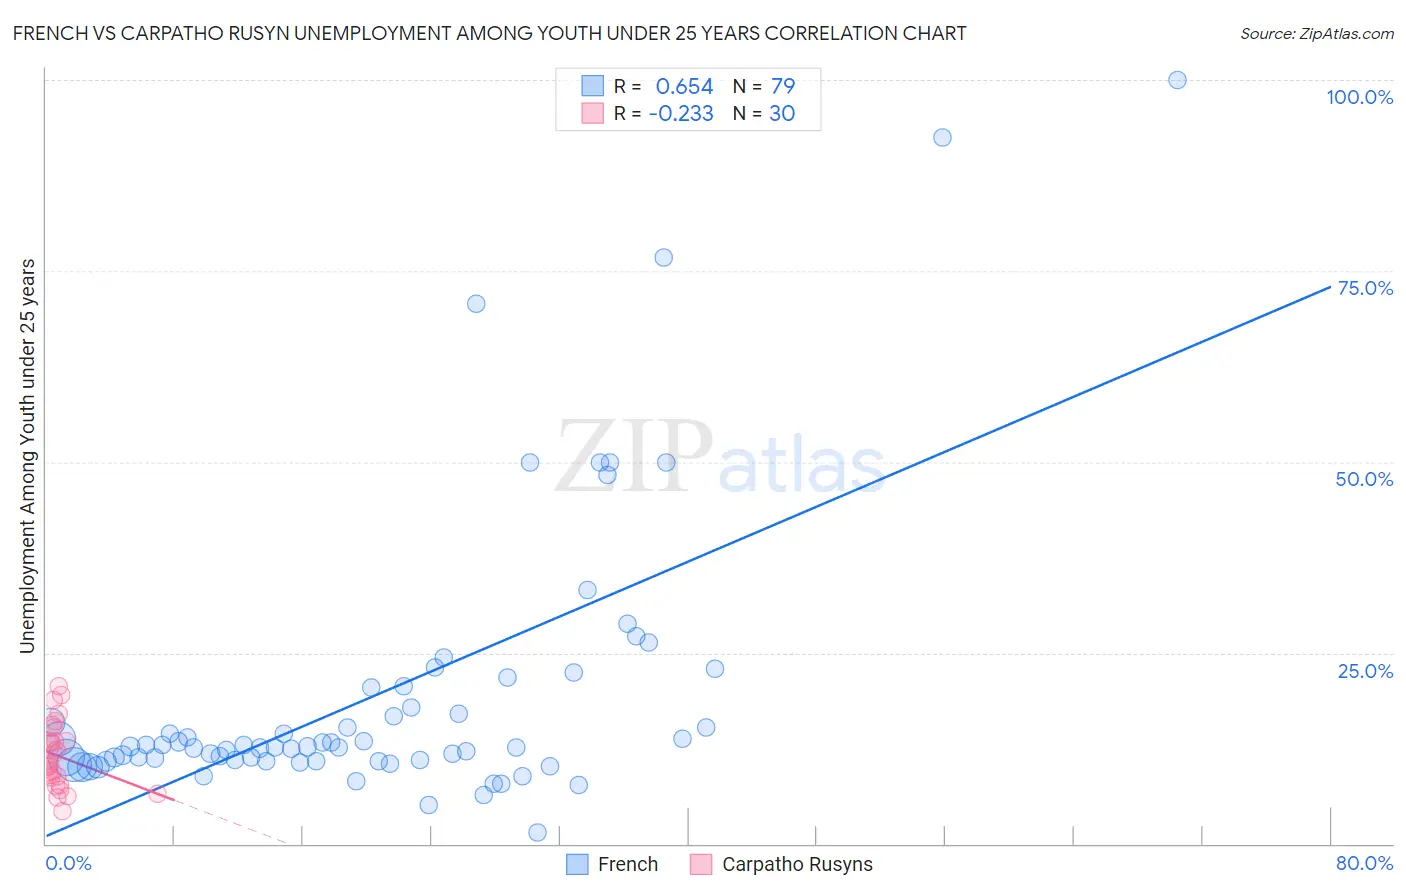 French vs Carpatho Rusyn Unemployment Among Youth under 25 years